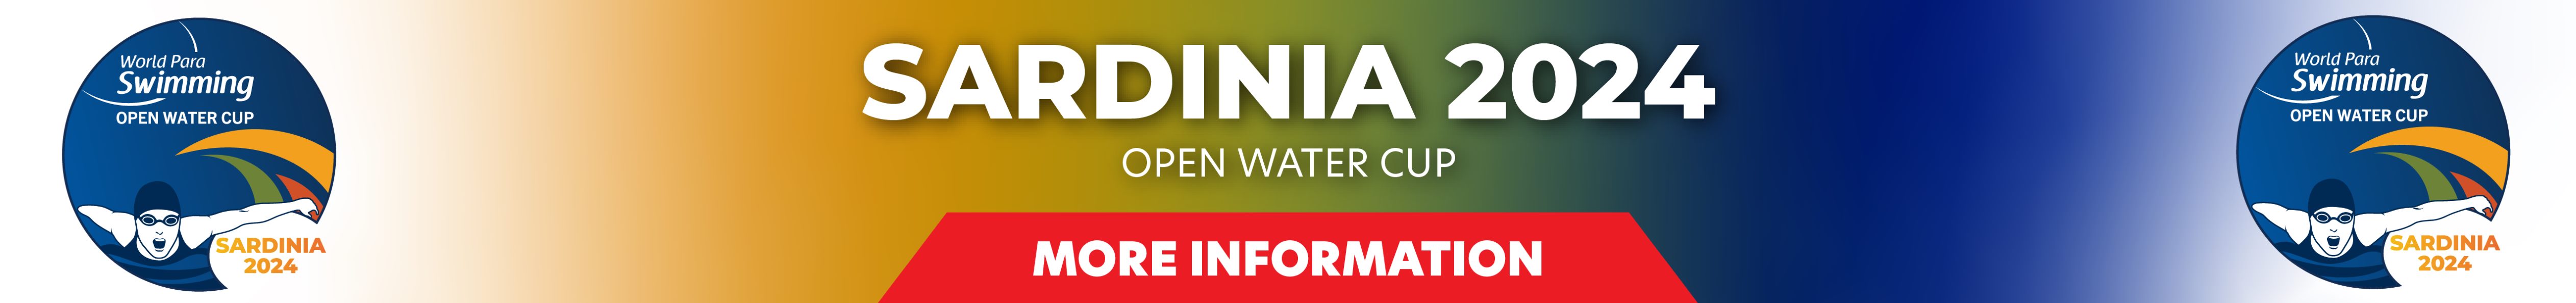 A banner of the Sardinia 2024 Open Water Cup More Information Package